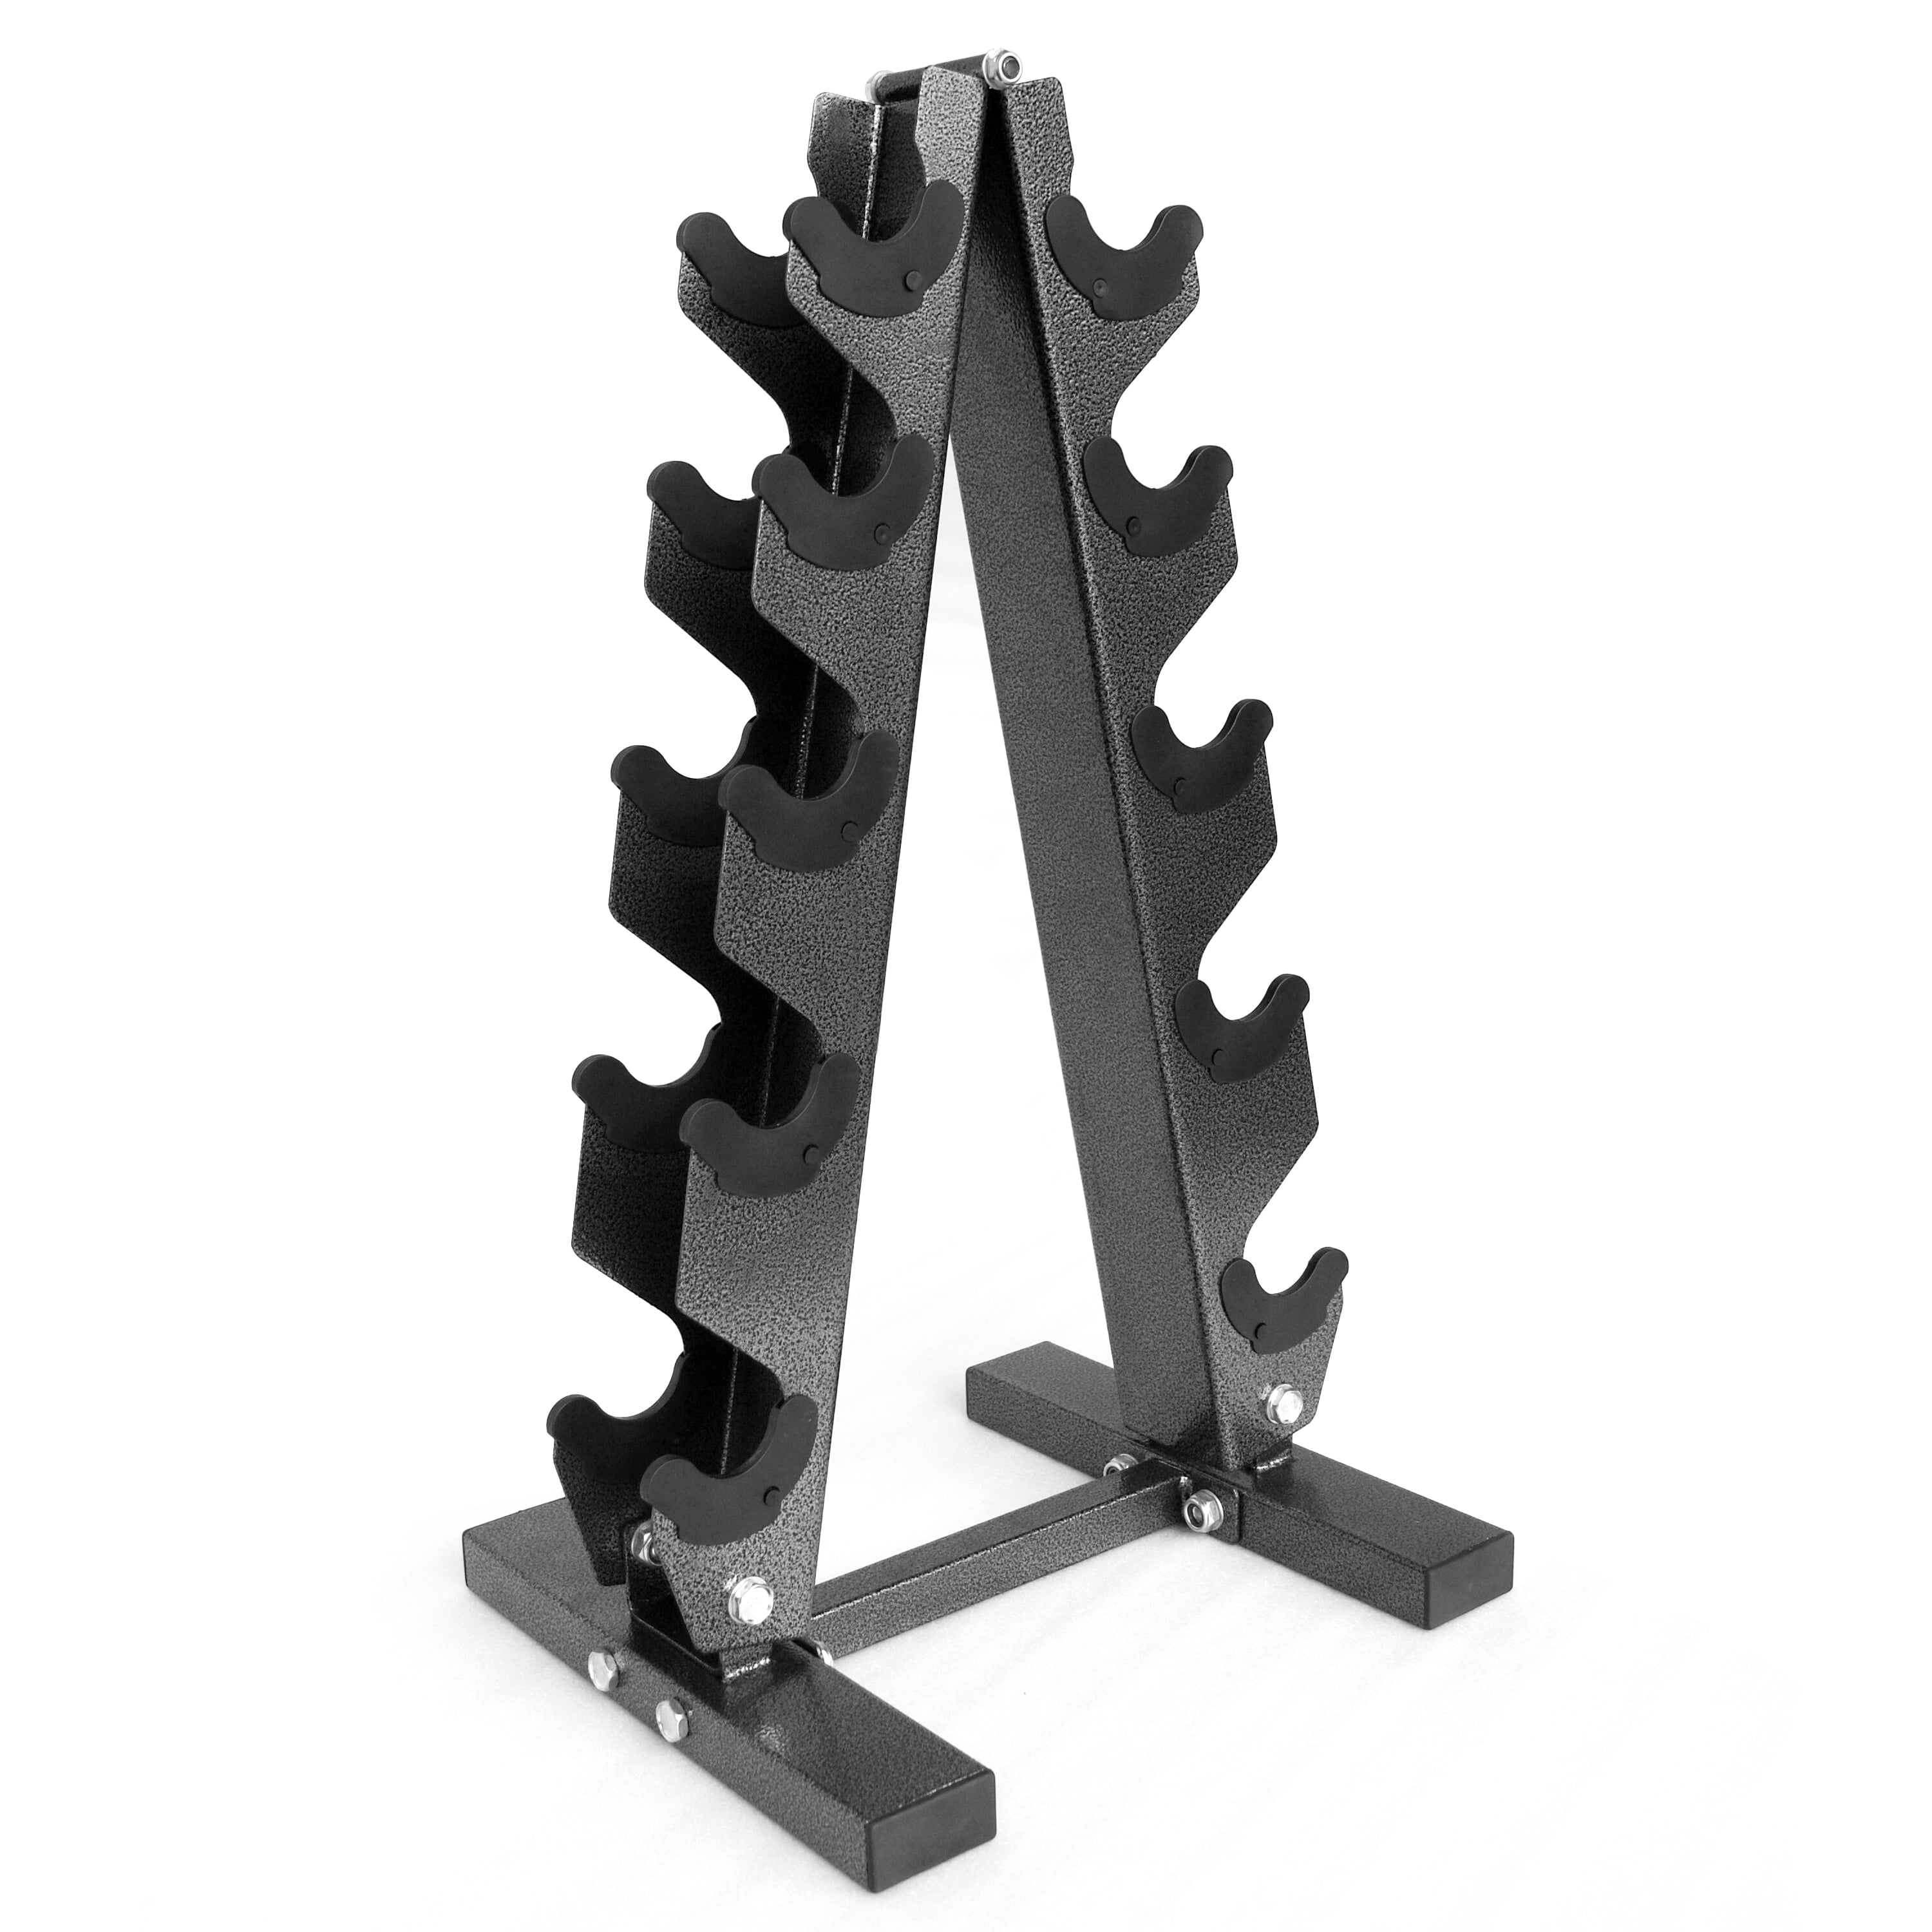 Details about   3 Tier Heavy Duty Dumbbell Weight Stand Gym Dumbbell Storage A-Frame Rack USA 